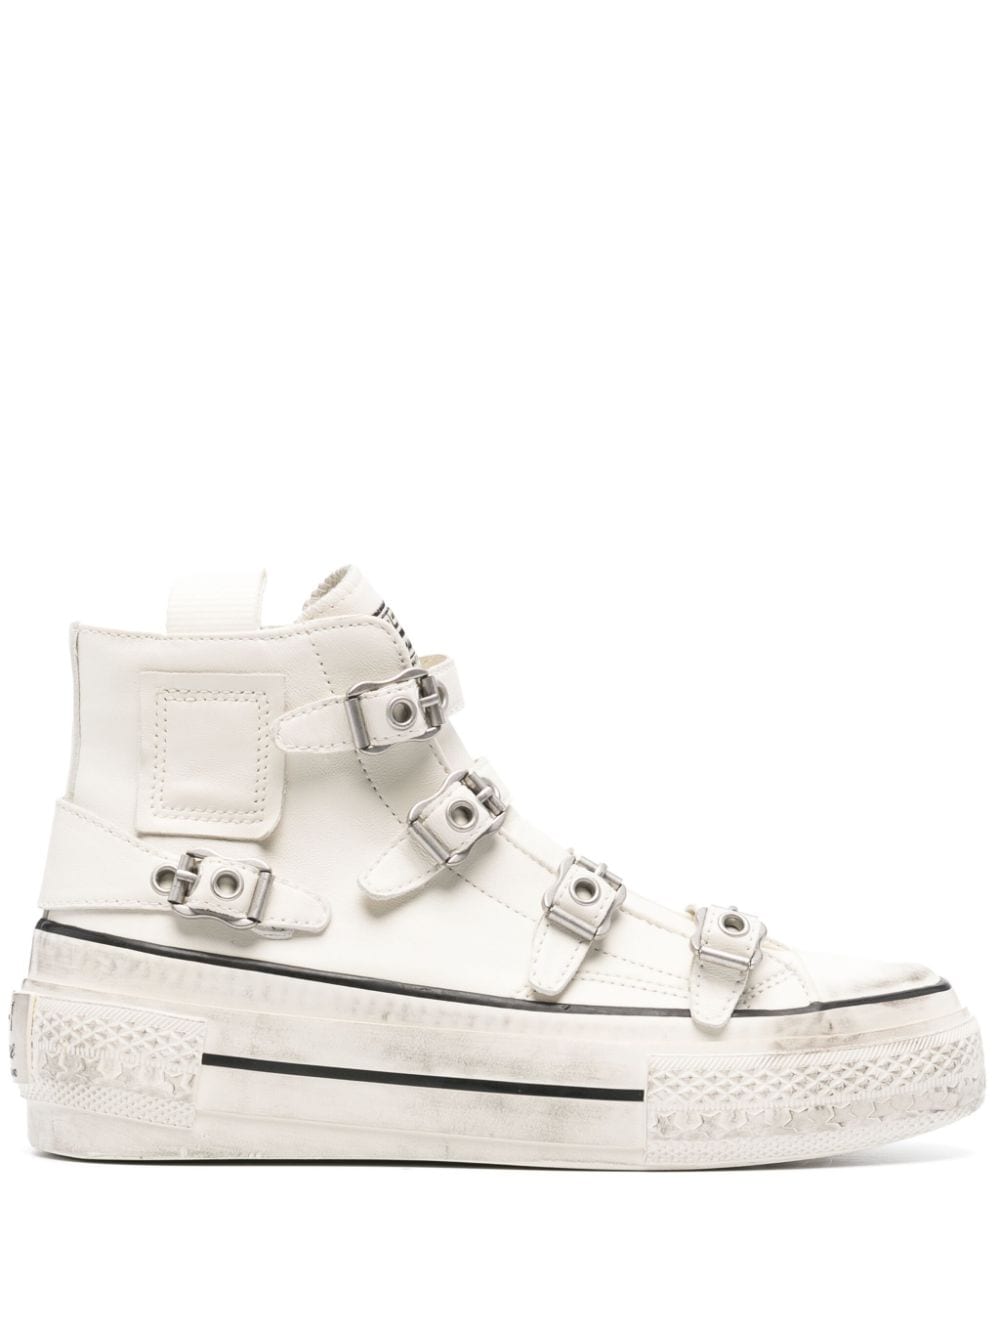 Ash Rainbow distressed-finish sneakers - White